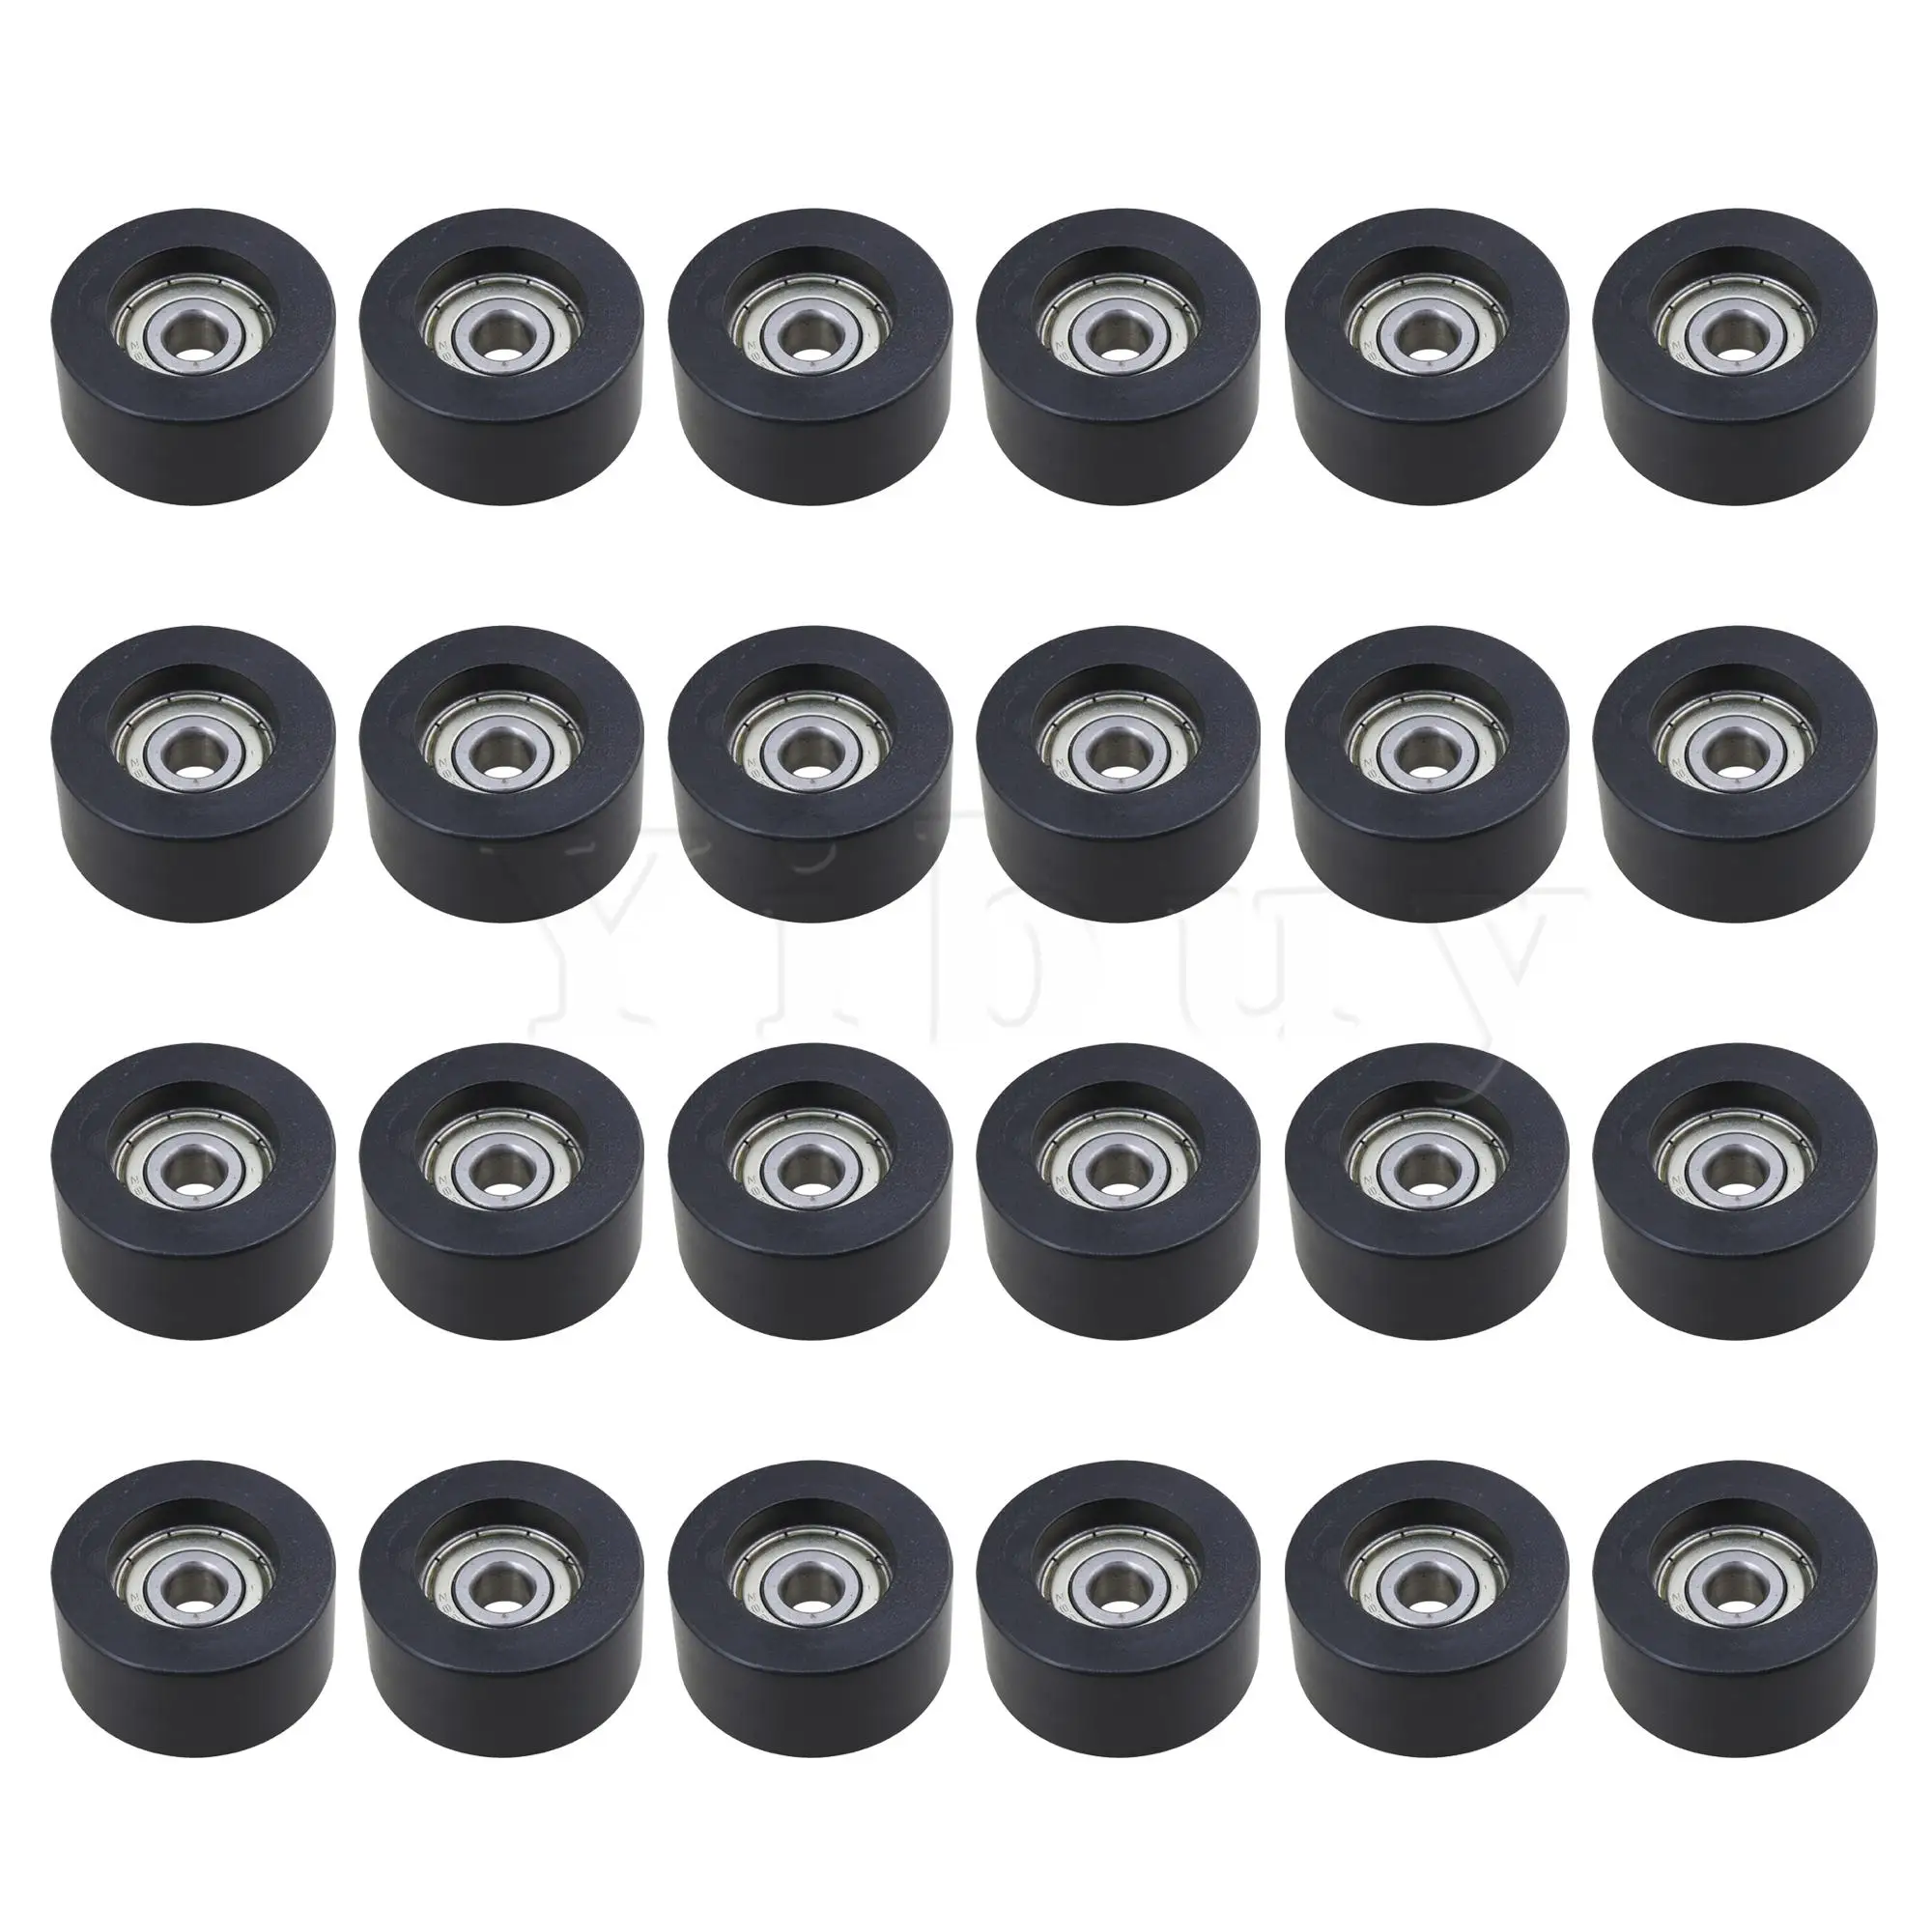 

24 x Guide Pulley Wheels Black Roller Loading Capacity 157KG for Window